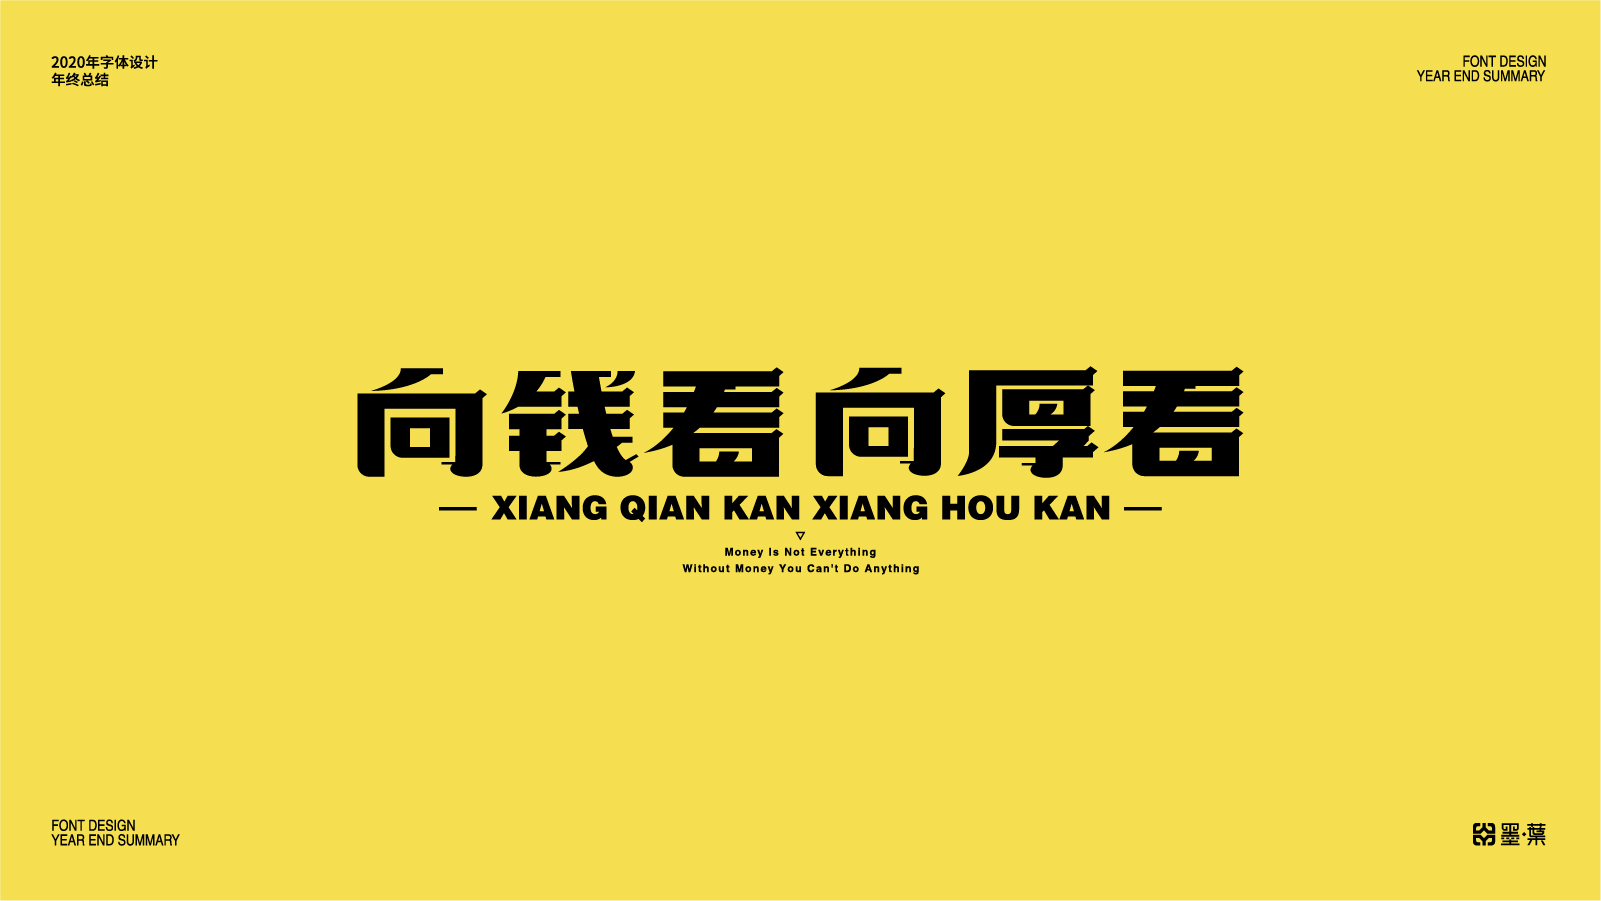 Commercial font design with yellow background